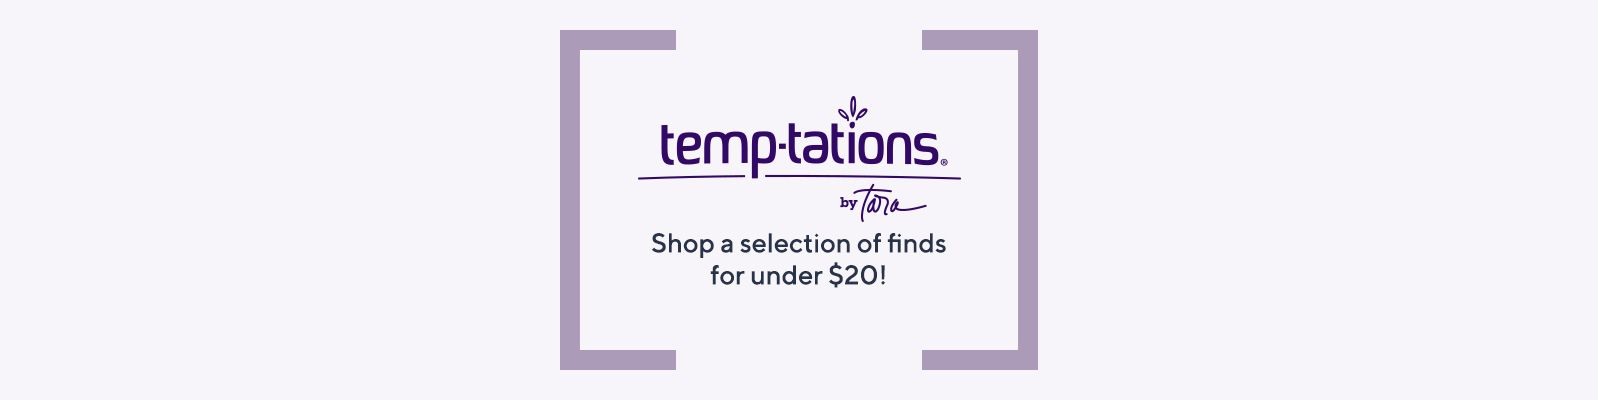 Temp-tations®:  Shop a selection of finds for under $20! 